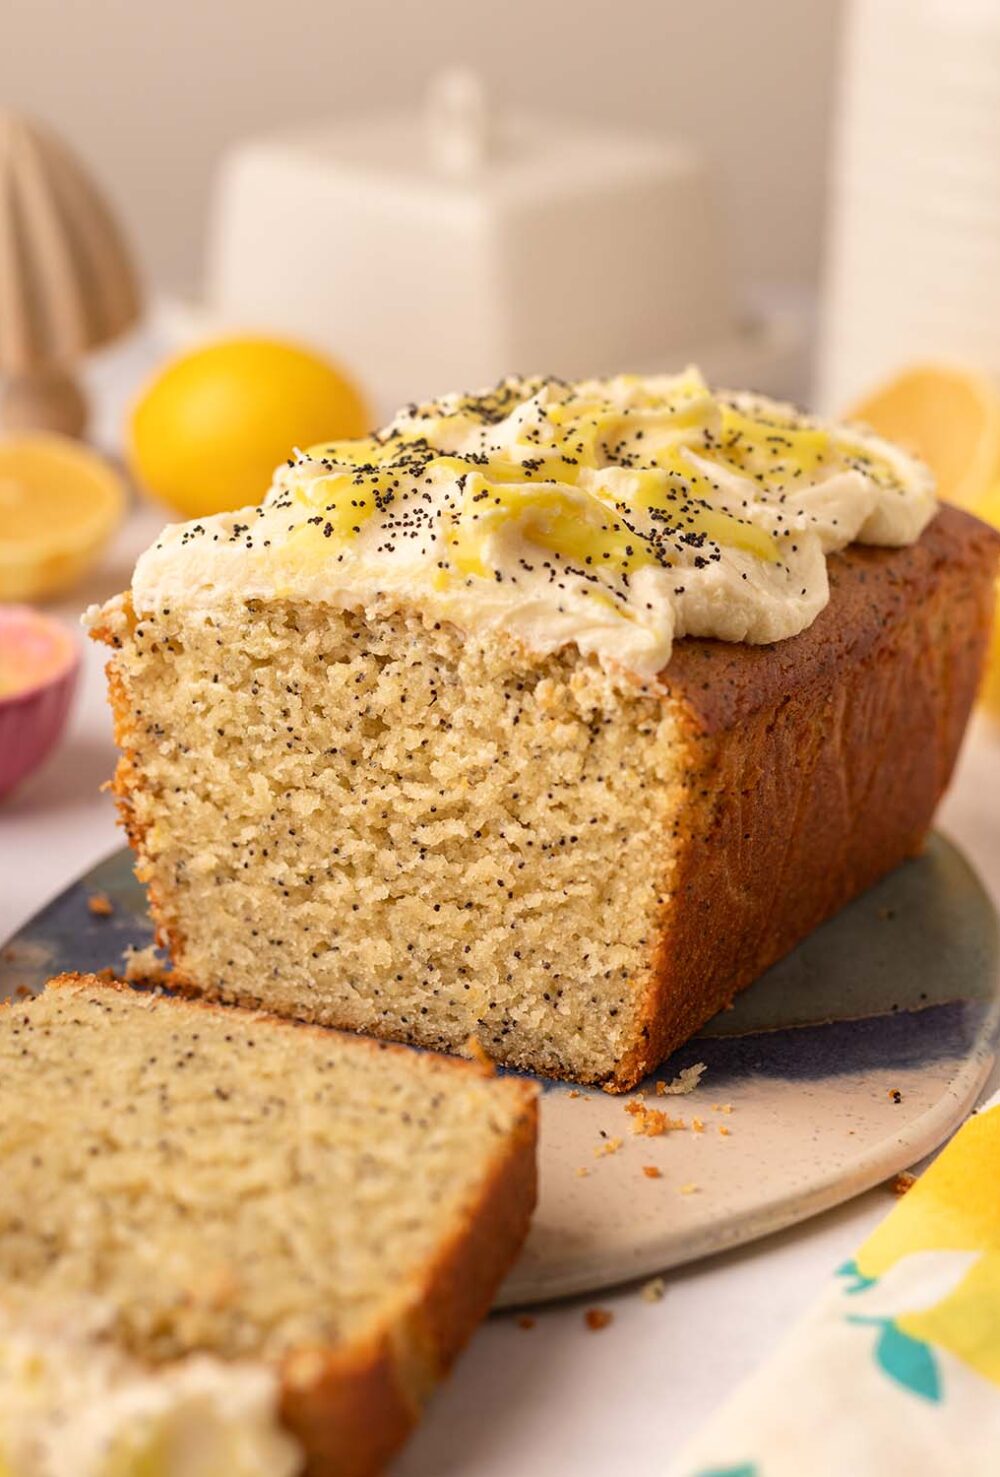 Lemon poppy seed loaf cake on oval serving board. The cake has a slice cut off revealing the fluffy golden texture of the cake.